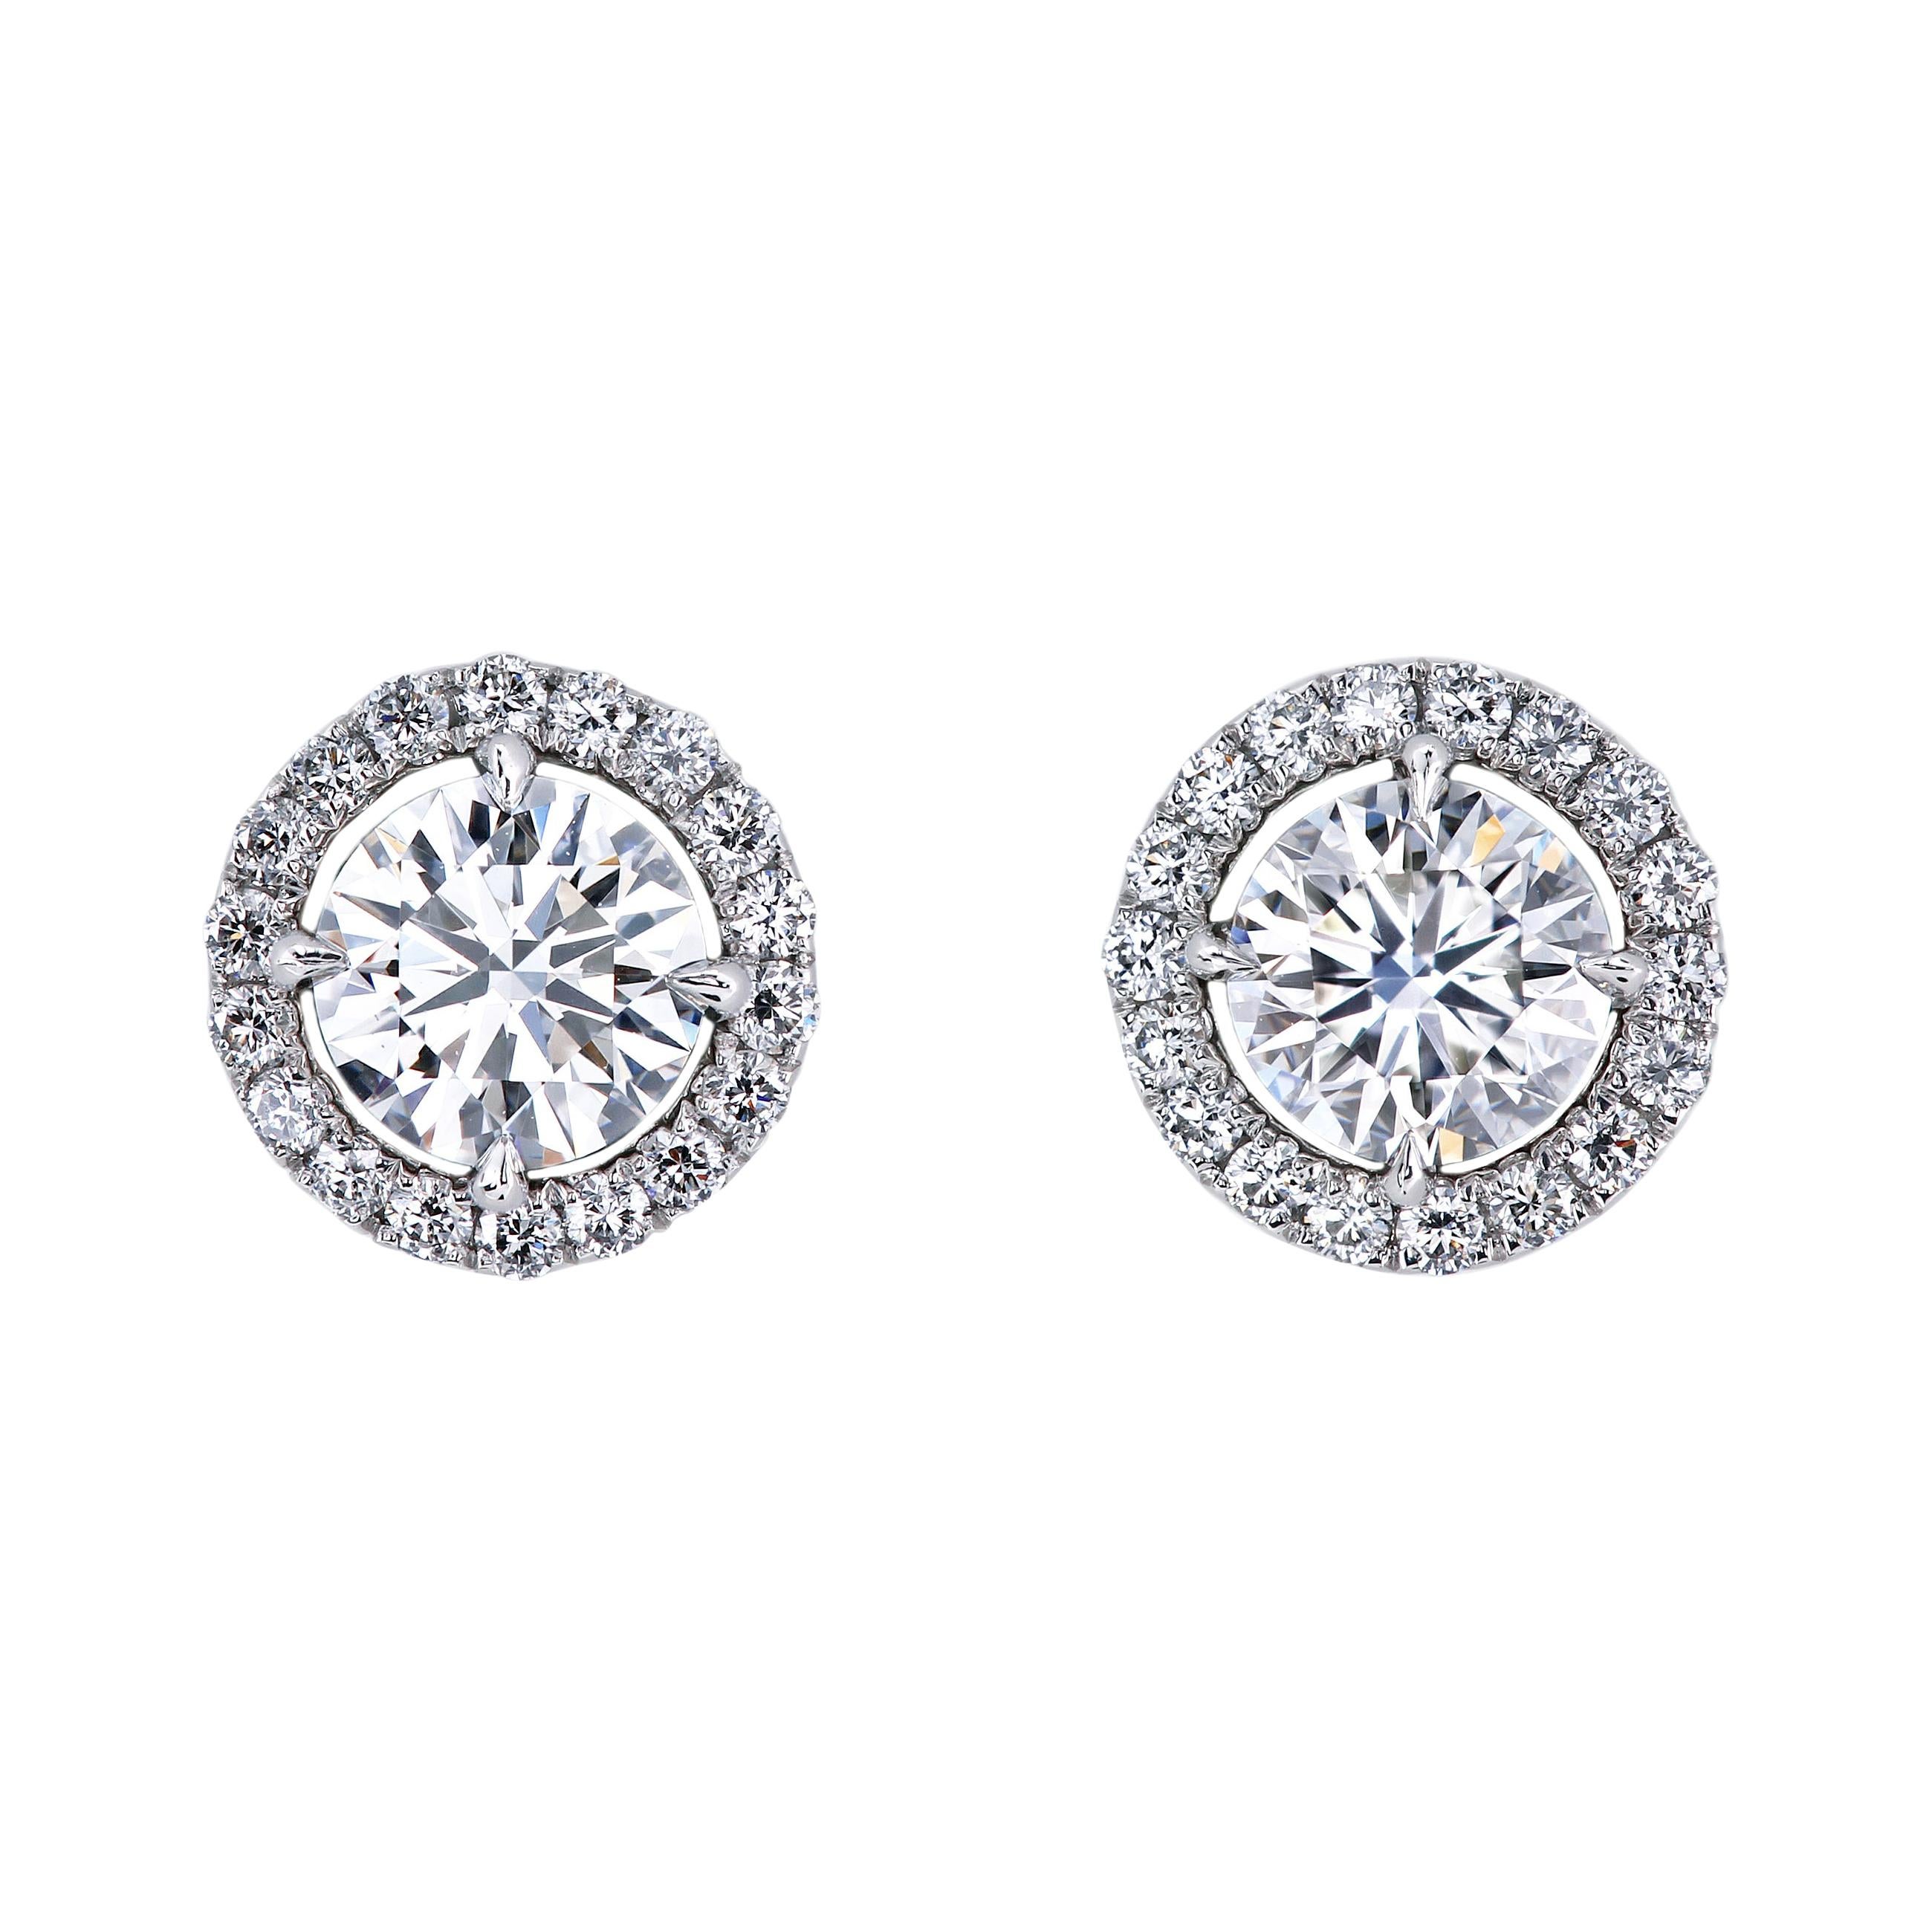 Leon Mege Round Diamond Platinum Studs Earrings with Removable Jackets